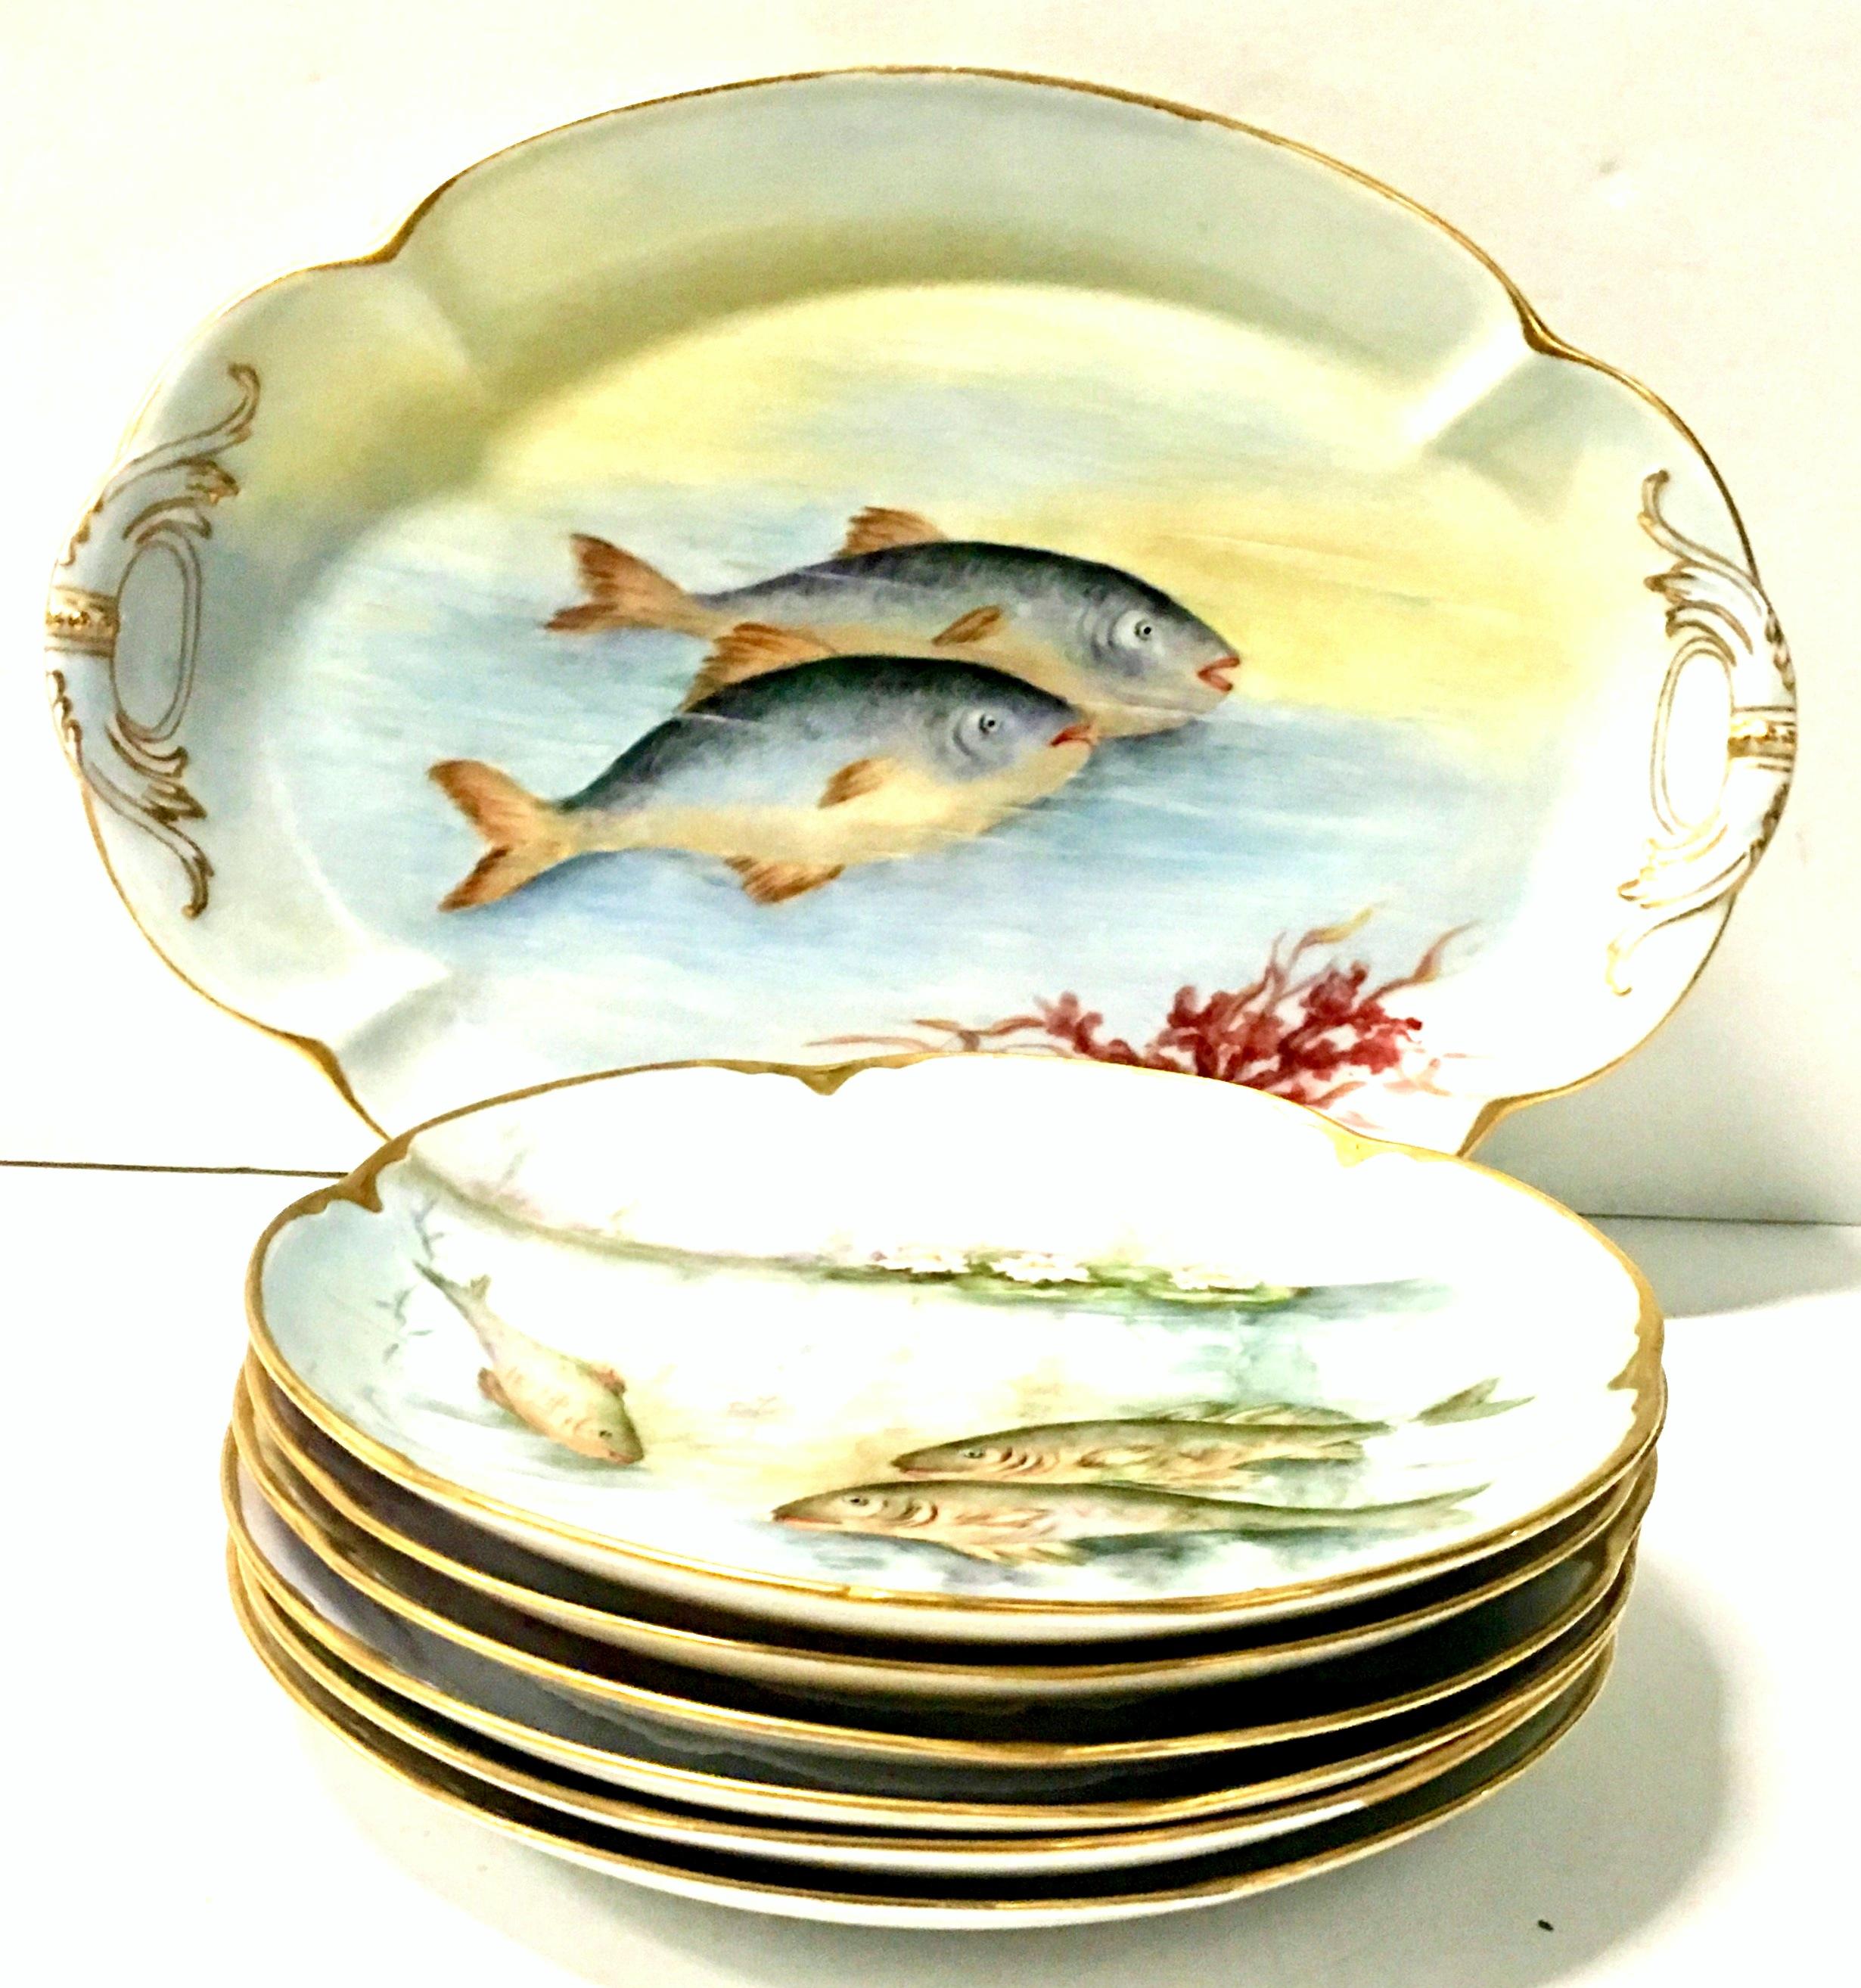 1890s Victorian Havliand Limoge & JHR Bavaria porcelain and 22-karat gold hand painted artist signed seven piece fish serving set. Stunning vibrant pastel hue set of seven fish serving porcelain plates and oval platter. Each piece depicts a